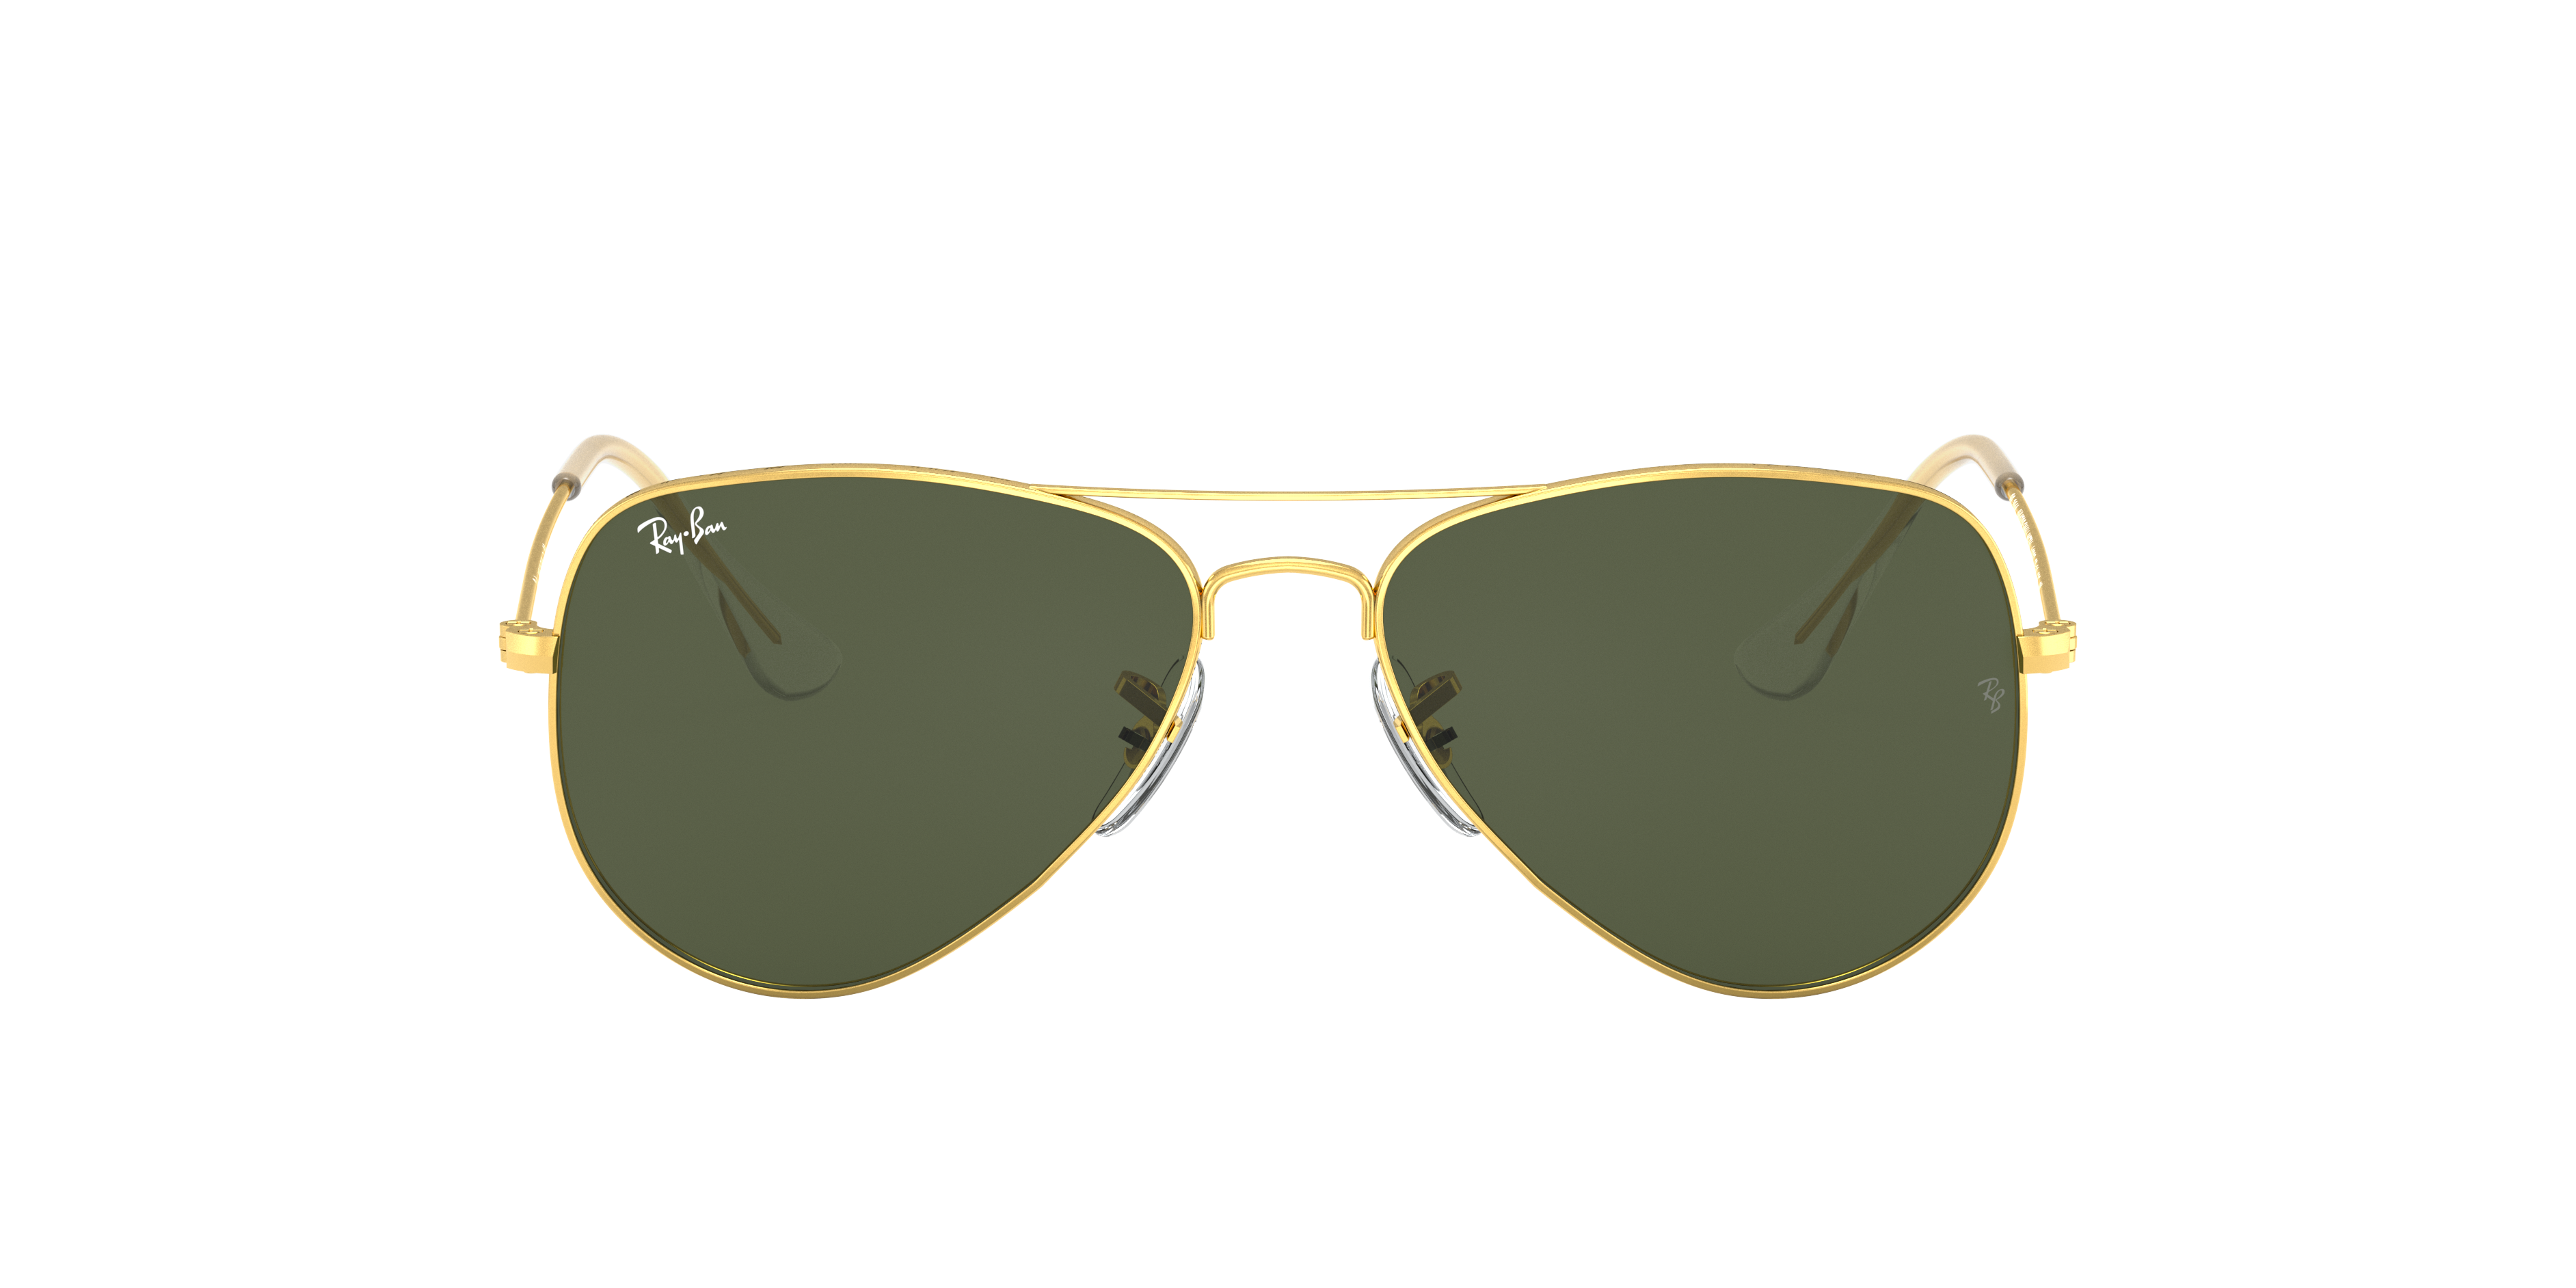 online ray ban glasses